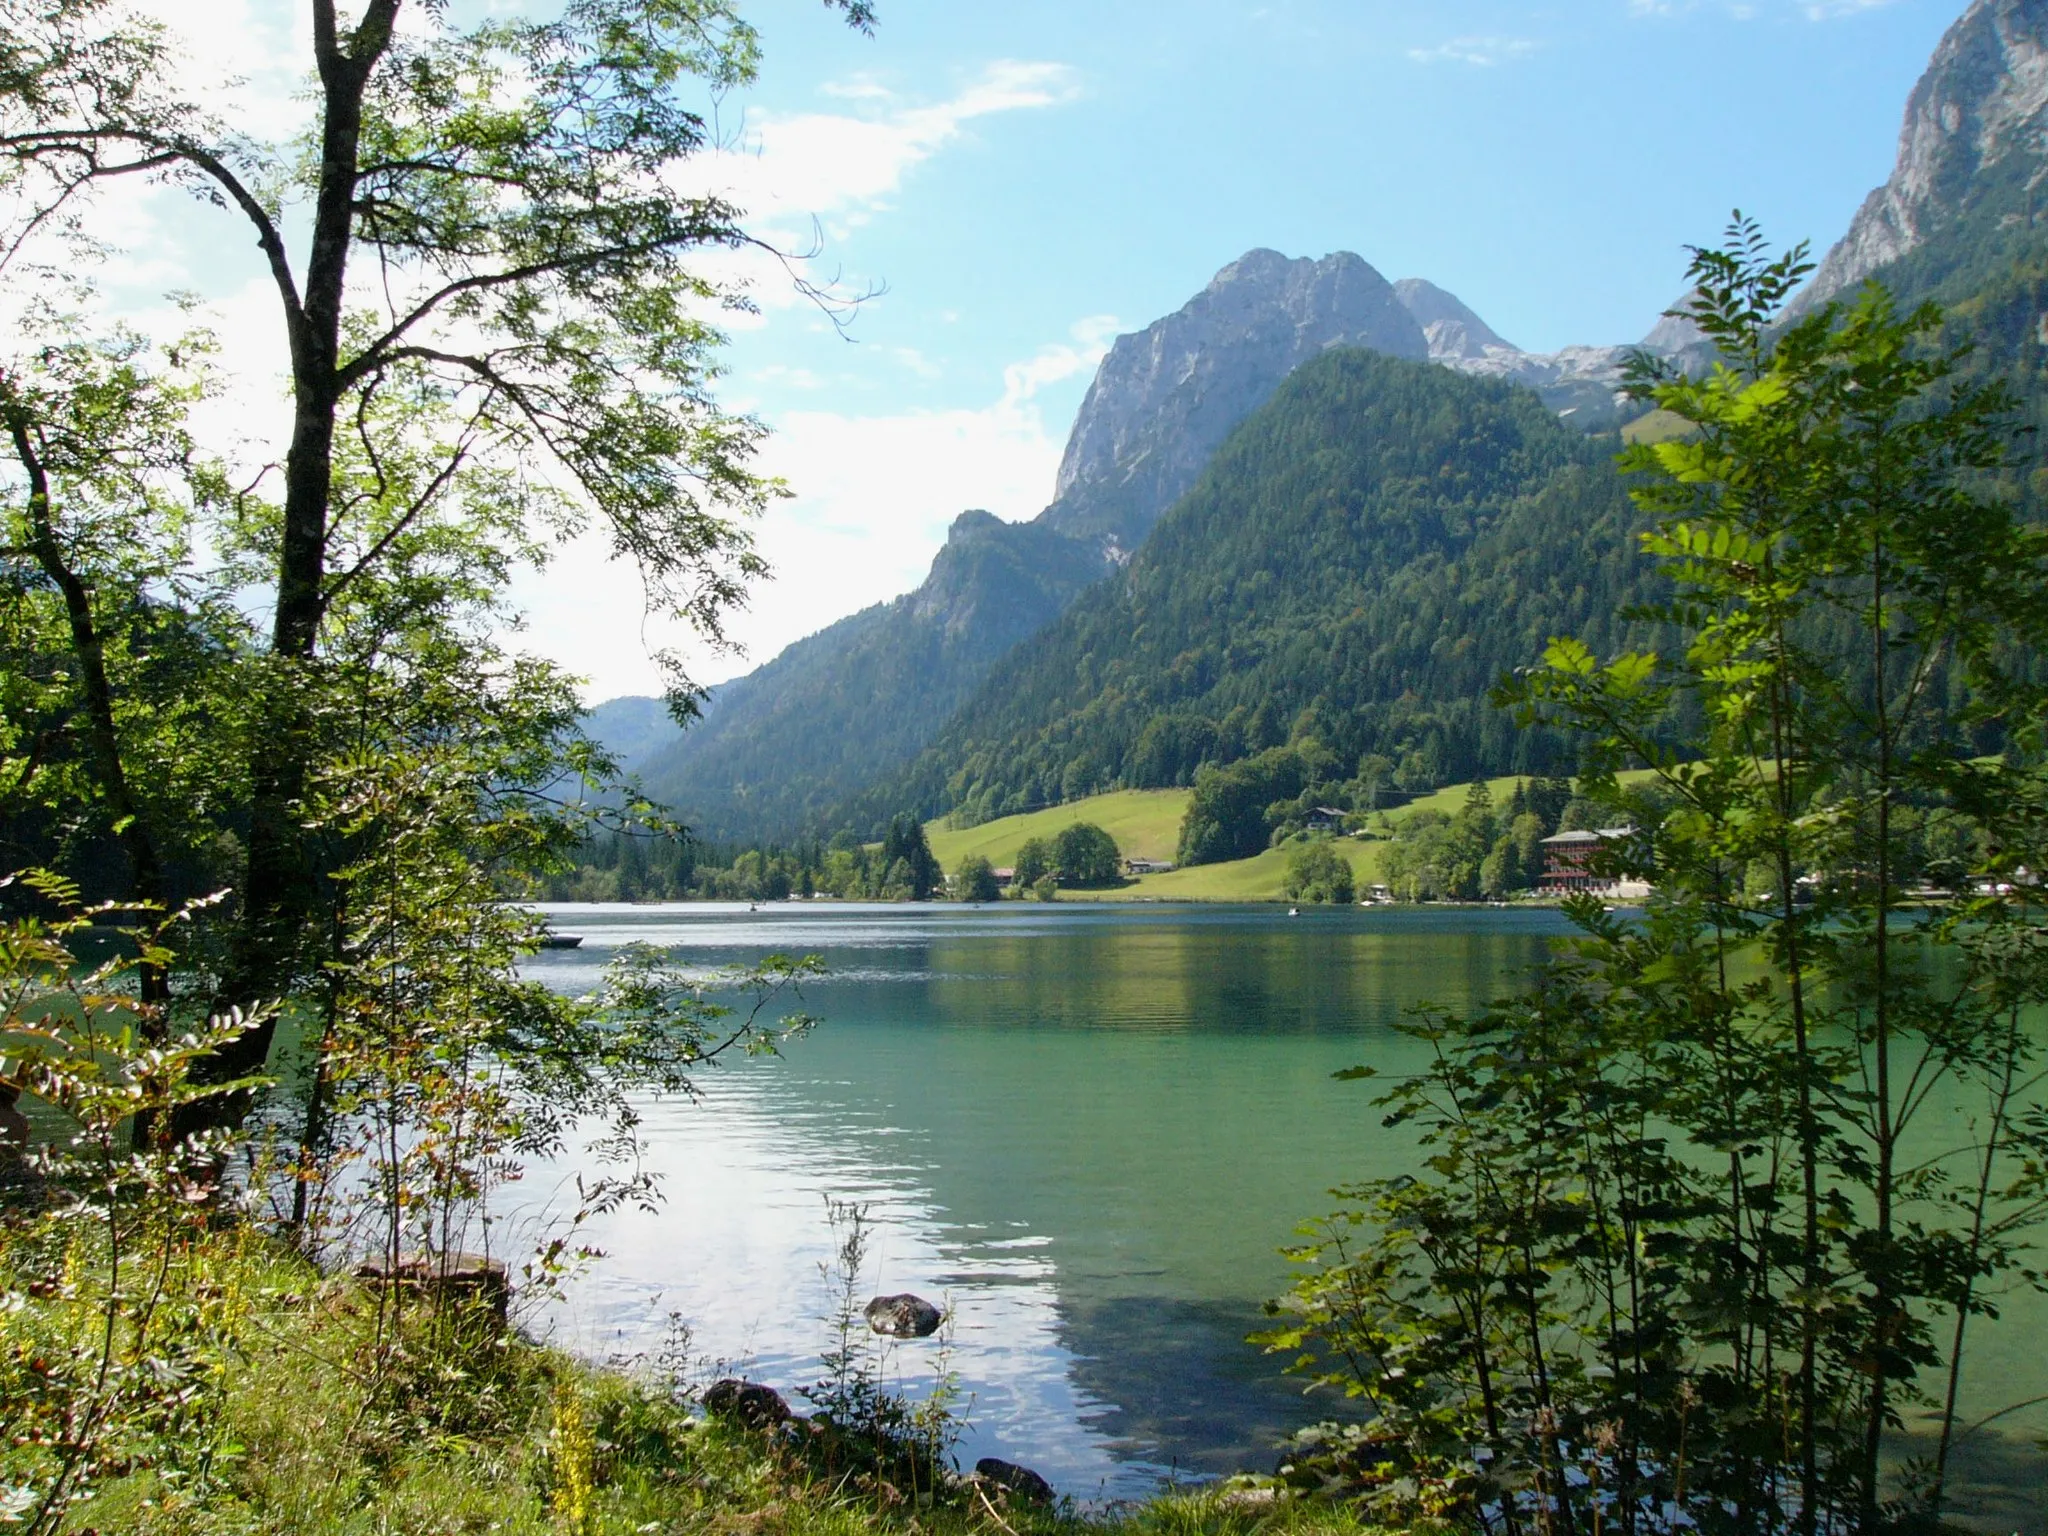 Photo showing: Description: Hintersee, Lake in Bavaria, Germany

Source: own work
Uploader: User:Nikater
Date: October 31, 2006
Other Versions: none
License status: